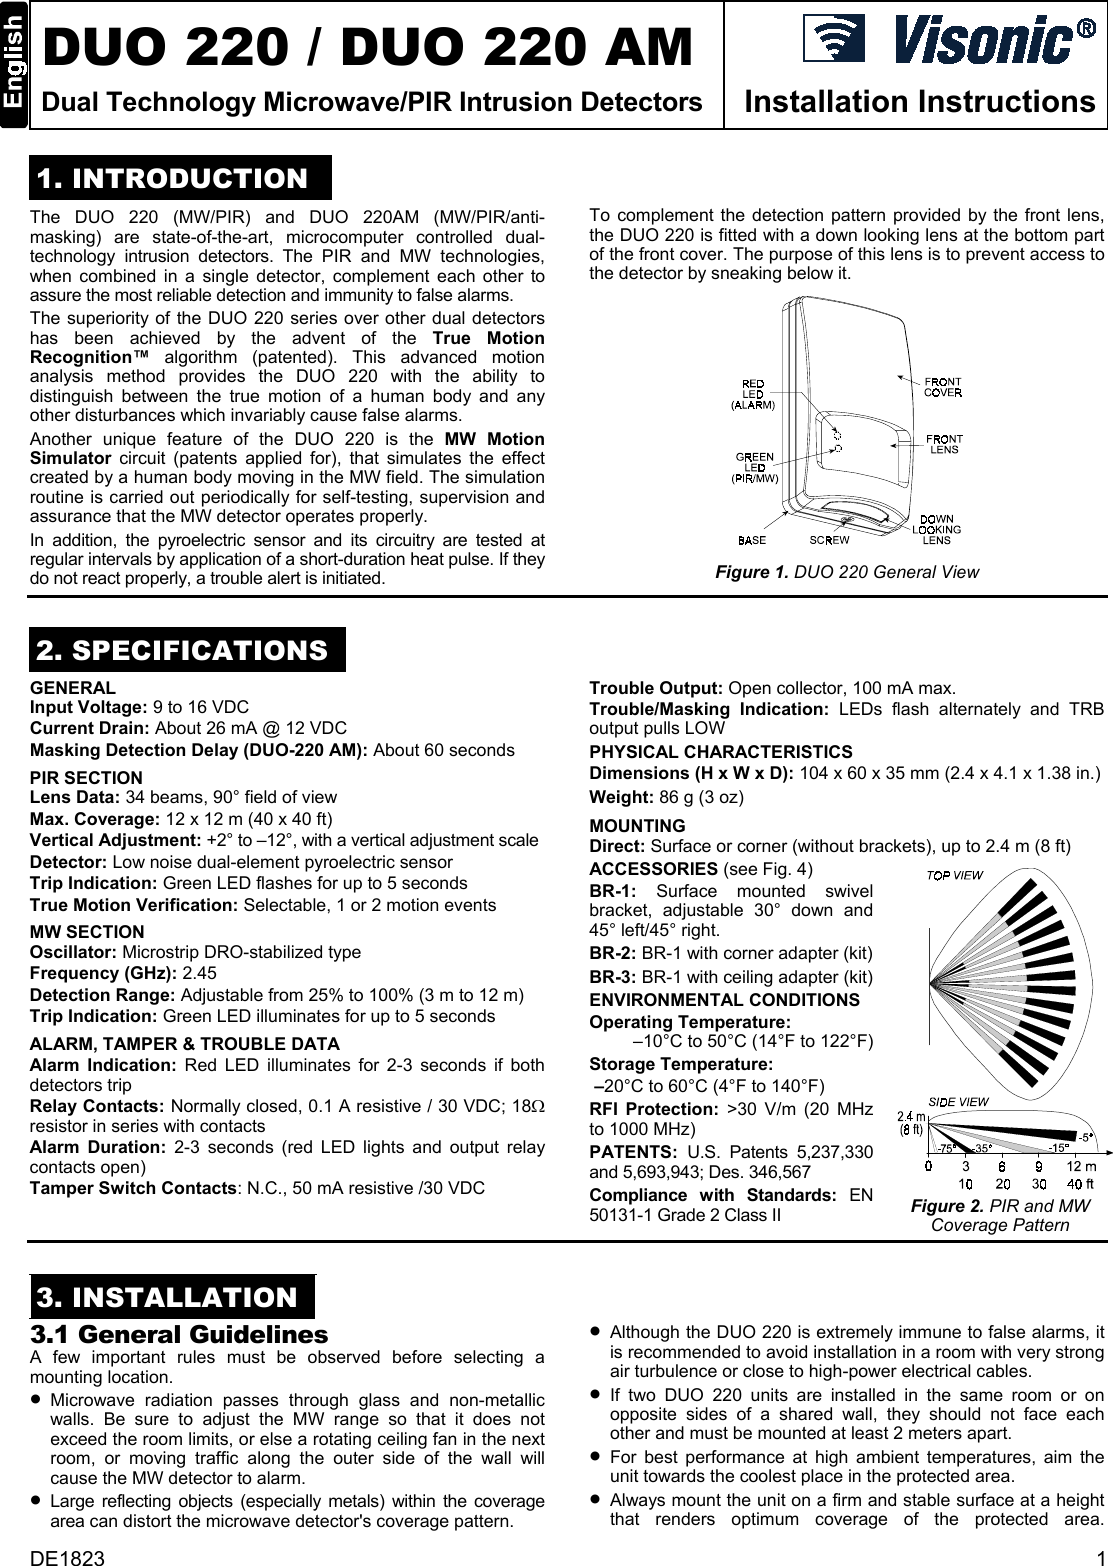  DUO 220 / DUO 220 AM Dual Technology Microwave/PIR Intrusion Detectors  Installation Instructions 1. INTRODUCTION To complement the detection pattern provided by the front lens, the DUO 220 is fitted with a down looking lens at the bottom part of the front cover. The purpose of this lens is to prevent access to the detector by sneaking below it.  The DUO 220 (MW/PIR) and DUO 220AM (MW/PIR/anti- masking) are state-of-the-art, microcomputer controlled dual- technology intrusion detectors. The PIR and MW technologies, when combined in a single detector, complement each other to assure the most reliable detection and immunity to false alarms.  The superiority of the DUO 220 series over other dual detectors has been achieved by the advent of the True Motion Recognition™  algorithm (patented). This advanced motion analysis method provides the DUO 220 with the ability to distinguish between the true motion of a human body and any other disturbances which invariably cause false alarms.  Another unique feature of the DUO 220 is the MW Motion Simulator circuit (patents applied for), that simulates the effect created by a human body moving in the MW field. The simulation routine is carried out periodically for self-testing, supervision and assurance that the MW detector operates properly. In addition, the pyroelectric sensor and its circuitry are tested at regular intervals by application of a short-duration heat pulse. If they do not react properly, a trouble alert is initiated.  Figure 1. DUO 220 General View  2. SPECIFICATIONS GENERAL  Trouble Output: Open collector, 100 mA max.  Input Voltage: 9 to 16 VDC  Trouble/Masking  Indication:  LEDs flash alternately and TRB output pulls LOW Current Drain: About 26 mA @ 12 VDC Masking Detection Delay (DUO-220 AM): About 60 seconds  PHYSICAL CHARACTERISTICS Dimensions (H x W x D): 104 x 60 x 35 mm (2.4 x 4.1 x 1.38 in.) PIR SECTION  Weight: 86 g (3 oz) Lens Data: 34 beams, 90° field of view Max. Coverage: 12 x 12 m (40 x 40 ft)  MOUNTING  Vertical Adjustment: +2° to –12°, with a vertical adjustment scale   Direct: Surface or corner (without brackets), up to 2.4 m (8 ft) Detector: Low noise dual-element pyroelectric sensor  ACCESSORIES (see Fig. 4) BR-1:  Surface mounted swivel bracket, adjustable 30° down and 45° left/45° right.  BR-2: BR-1 with corner adapter (kit) BR-3: BR-1 with ceiling adapter (kit) ENVIRONMENTAL CONDITIONS Operating Temperature:  –10°C to 50°C (14°F to 122°F) Storage Temperature:  –20°C to 60°C (4°F to 140°F) RFI Protection: &gt;30 V/m (20 MHz to 1000 MHz) PATENTS: U.S. Patents 5,237,330 and 5,693,943; Des. 346,567 Compliance with Standards: EN 50131-1 Grade 2 Class II   Figure 2. PIR and MW Coverage Pattern Trip Indication: Green LED flashes for up to 5 seconds True Motion Verification: Selectable, 1 or 2 motion events MW SECTION Oscillator: Microstrip DRO-stabilized type Frequency (GHz): 2.45 Detection Range: Adjustable from 25% to 100% (3 m to 12 m) Trip Indication: Green LED illuminates for up to 5 seconds ALARM, TAMPER &amp; TROUBLE DATA  Alarm Indication: Red LED illuminates for 2-3 seconds if both detectors trip Relay Contacts: Normally closed, 0.1 A resistive / 30 VDC; 18Ω resistor in series with contacts Alarm Duration: 2-3 seconds (red LED lights and output relay contacts open) Tamper Switch Contacts: N.C., 50 mA resistive /30 VDC  3. INSTALLATION •  Although the DUO 220 is extremely immune to false alarms, it is recommended to avoid installation in a room with very strong air turbulence or close to high-power electrical cables.  3.1 General Guidelines A few important rules must be observed before selecting a mounting location.   •  If two DUO 220 units are installed in the same room or on opposite sides of a shared wall, they should not face each other and must be mounted at least 2 meters apart. •  Microwave radiation passes through glass and non-metallic walls. Be sure to adjust the MW range so that it does not exceed the room limits, or else a rotating ceiling fan in the next room, or moving traffic along the outer side of the wall will cause the MW detector to alarm. •  For best performance at high ambient temperatures, aim the unit towards the coolest place in the protected area.  •  Always mount the unit on a firm and stable surface at a height that renders optimum coverage of the protected area. •  Large reflecting objects (especially metals) within the coverage area can distort the microwave detector&apos;s coverage pattern. DE1823  1 